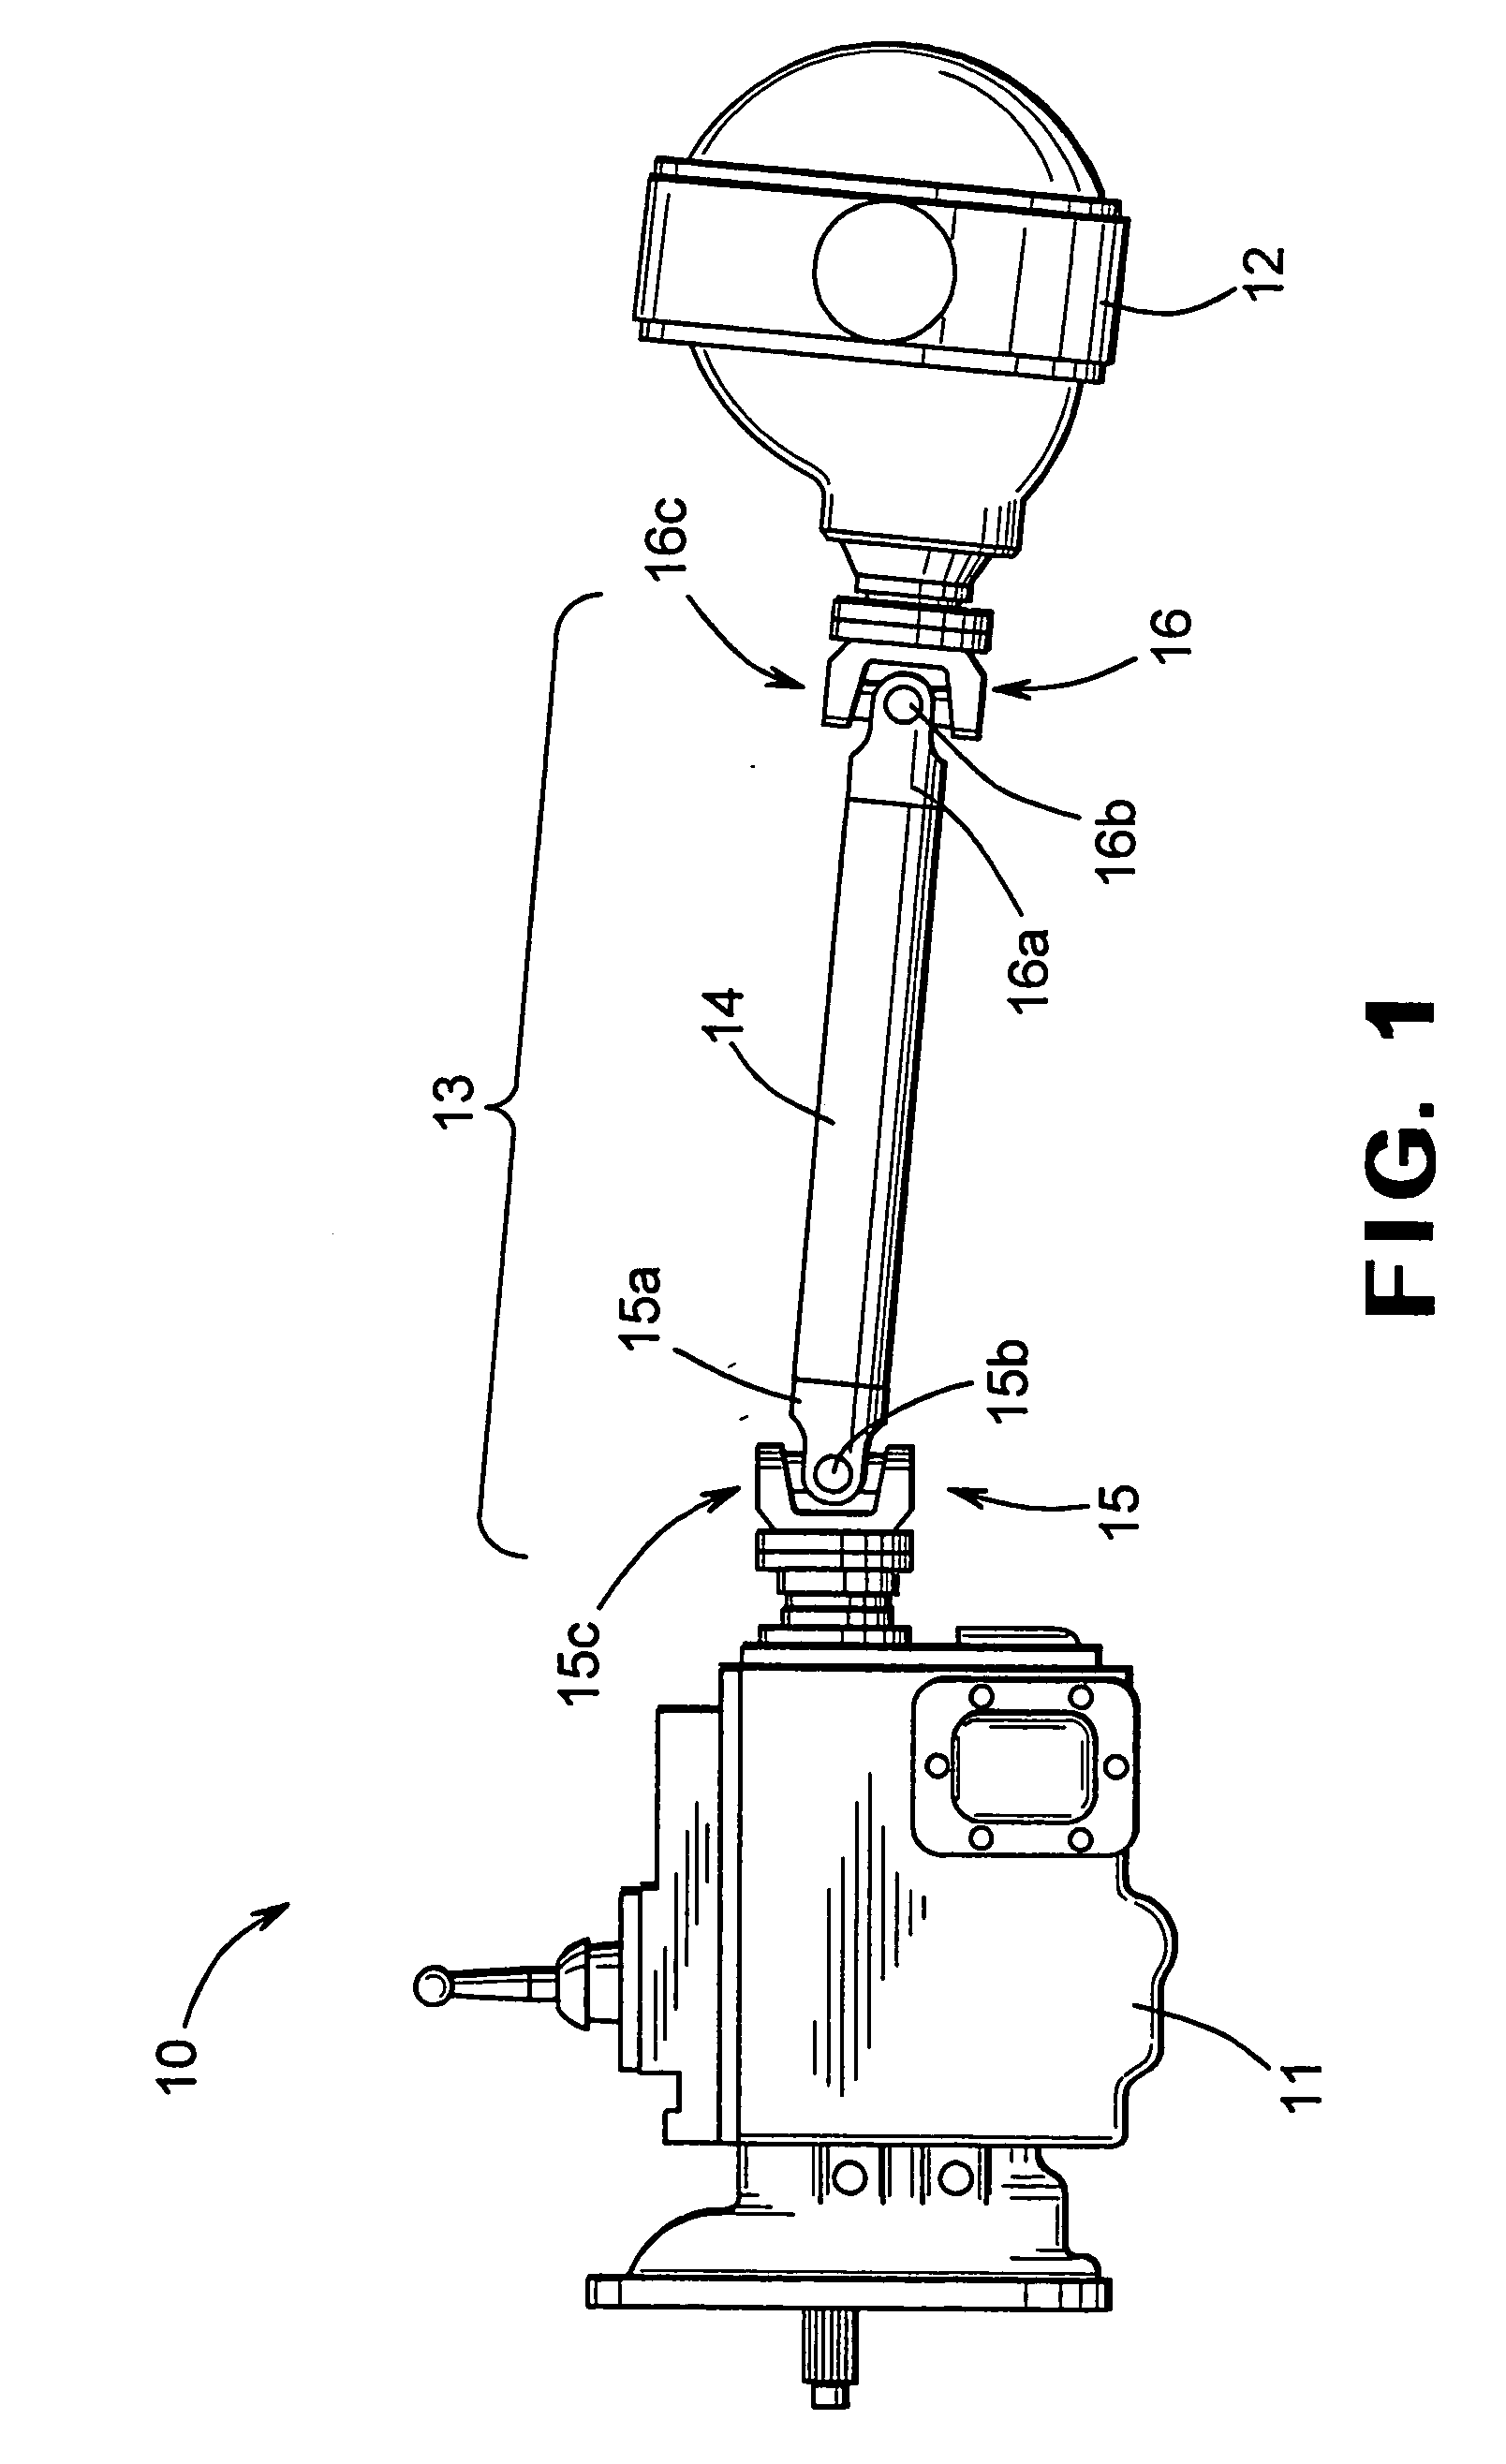 Fastener with opposite hand threads for securing two components together